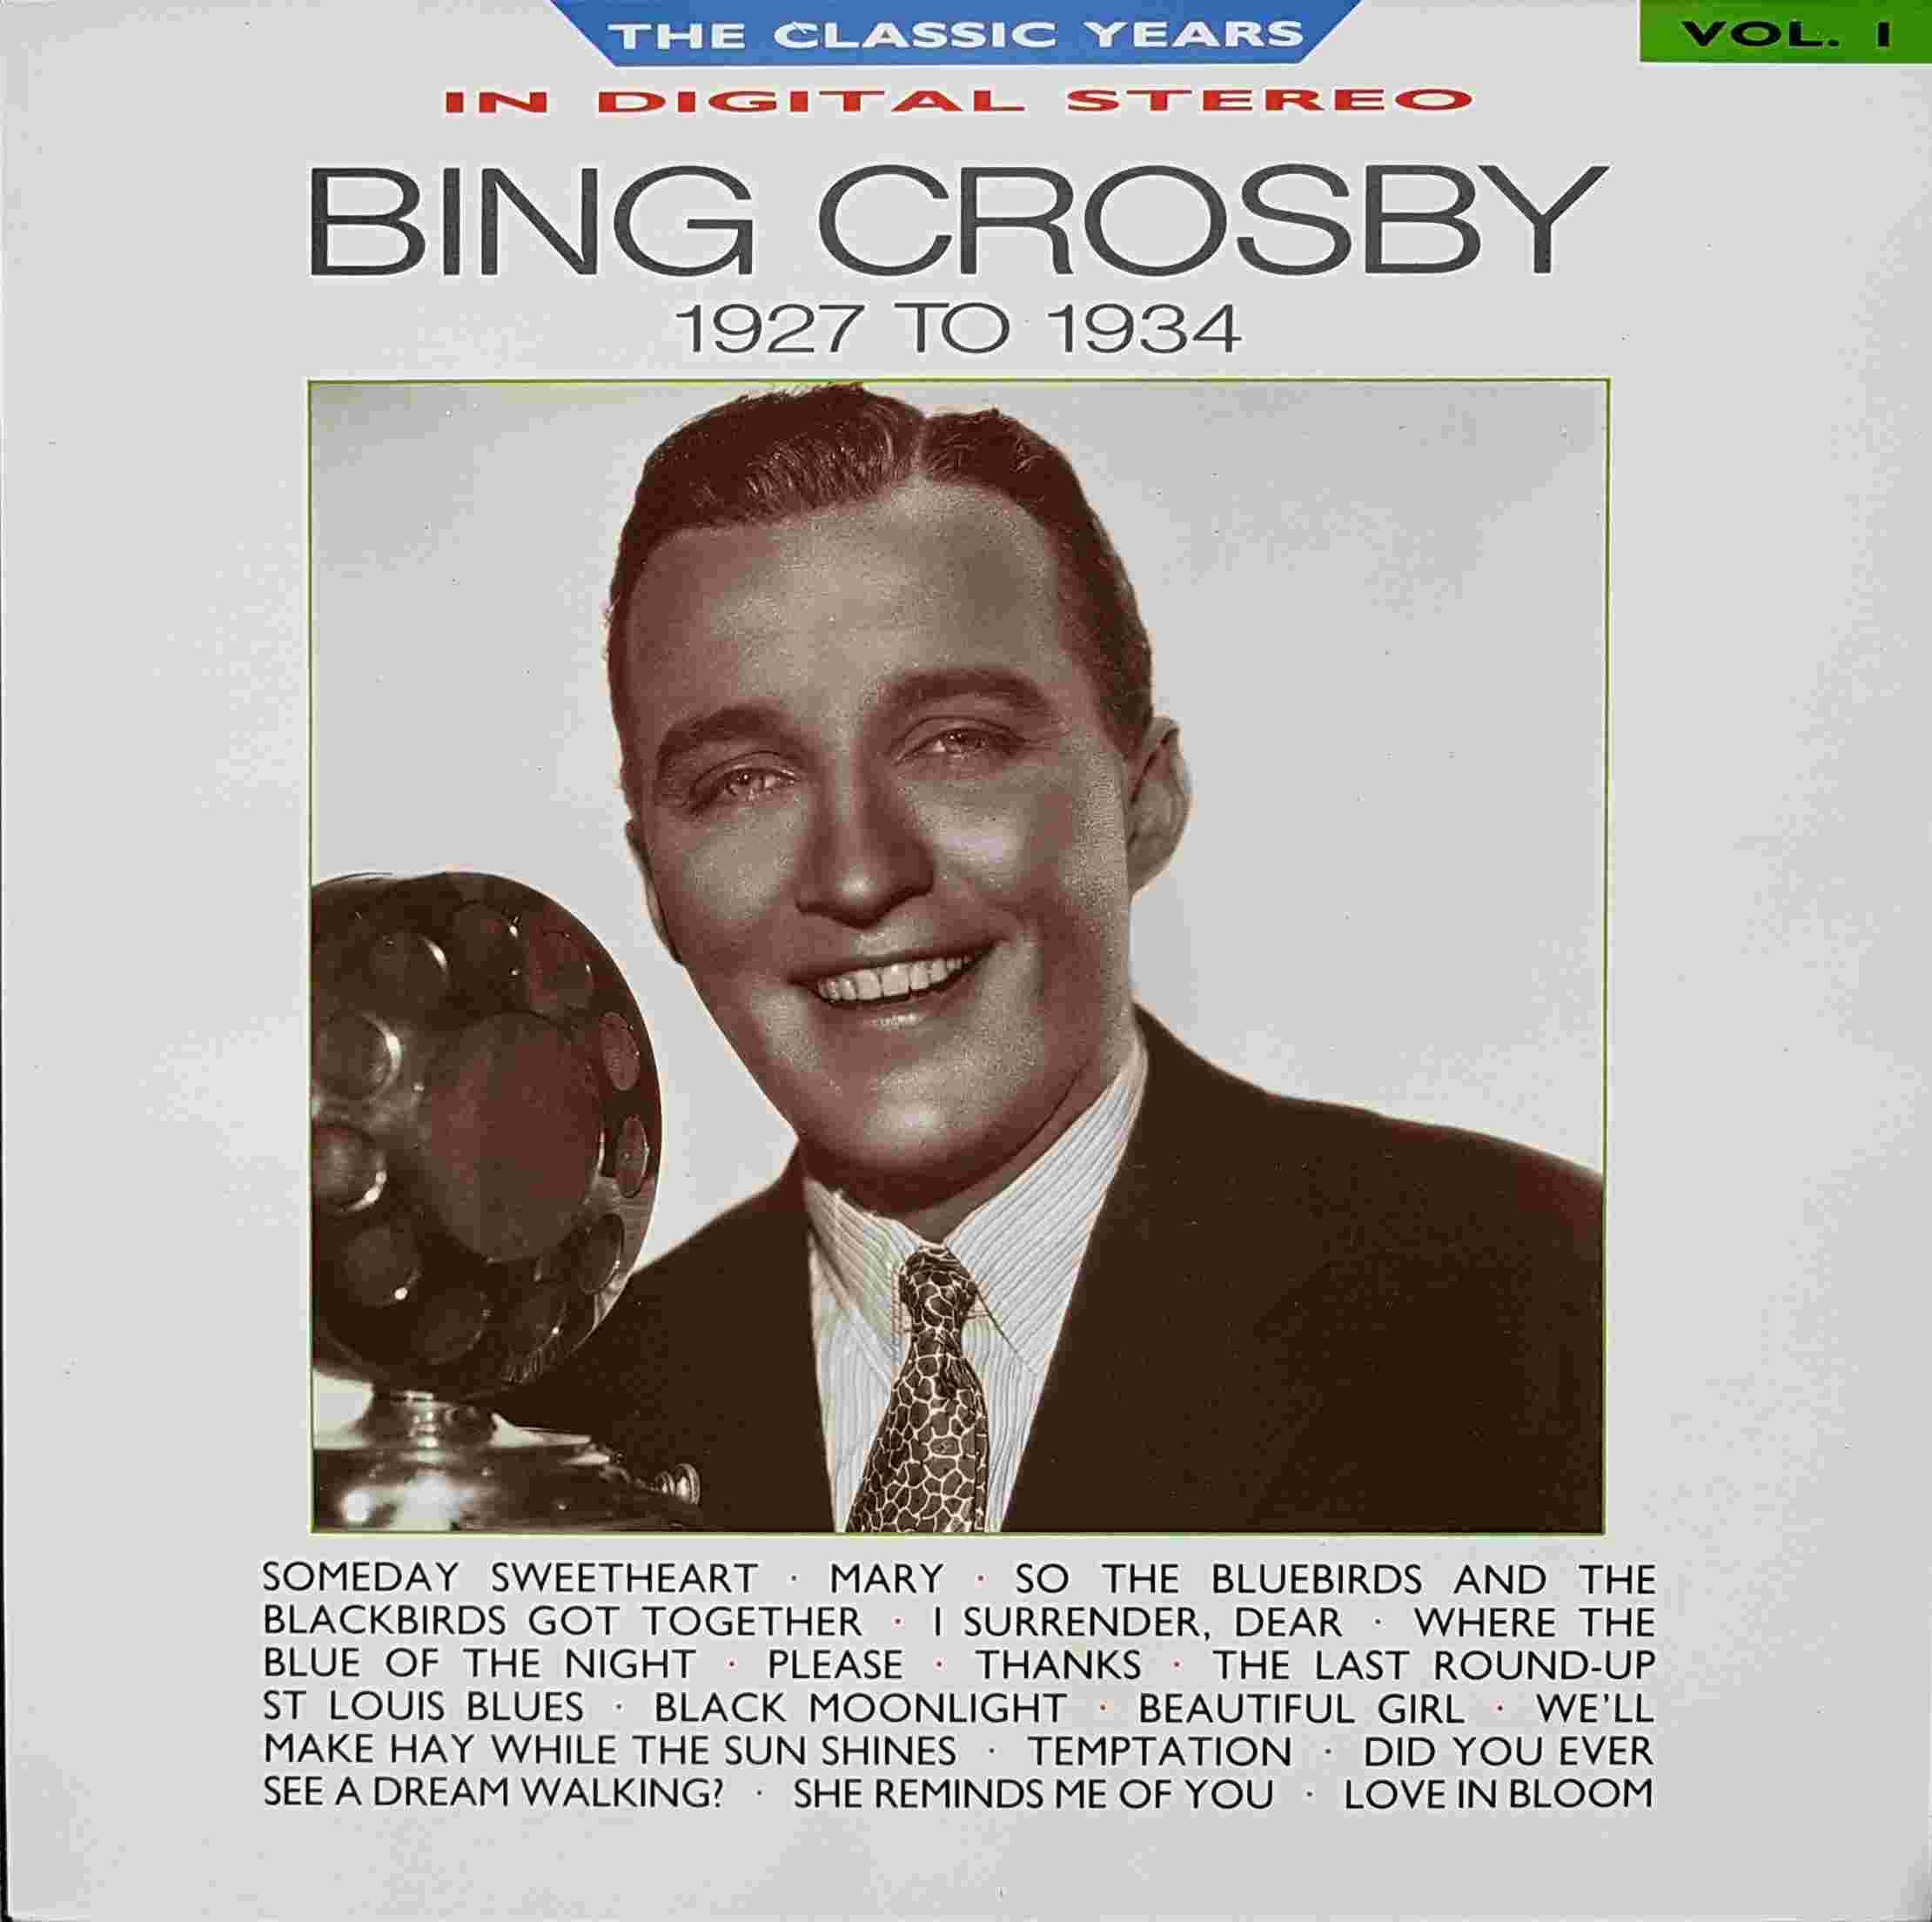 Picture of REB 648 Classic years - Volume 1, Bing Crosby by artist Bing Crosby from the BBC albums - Records and Tapes library